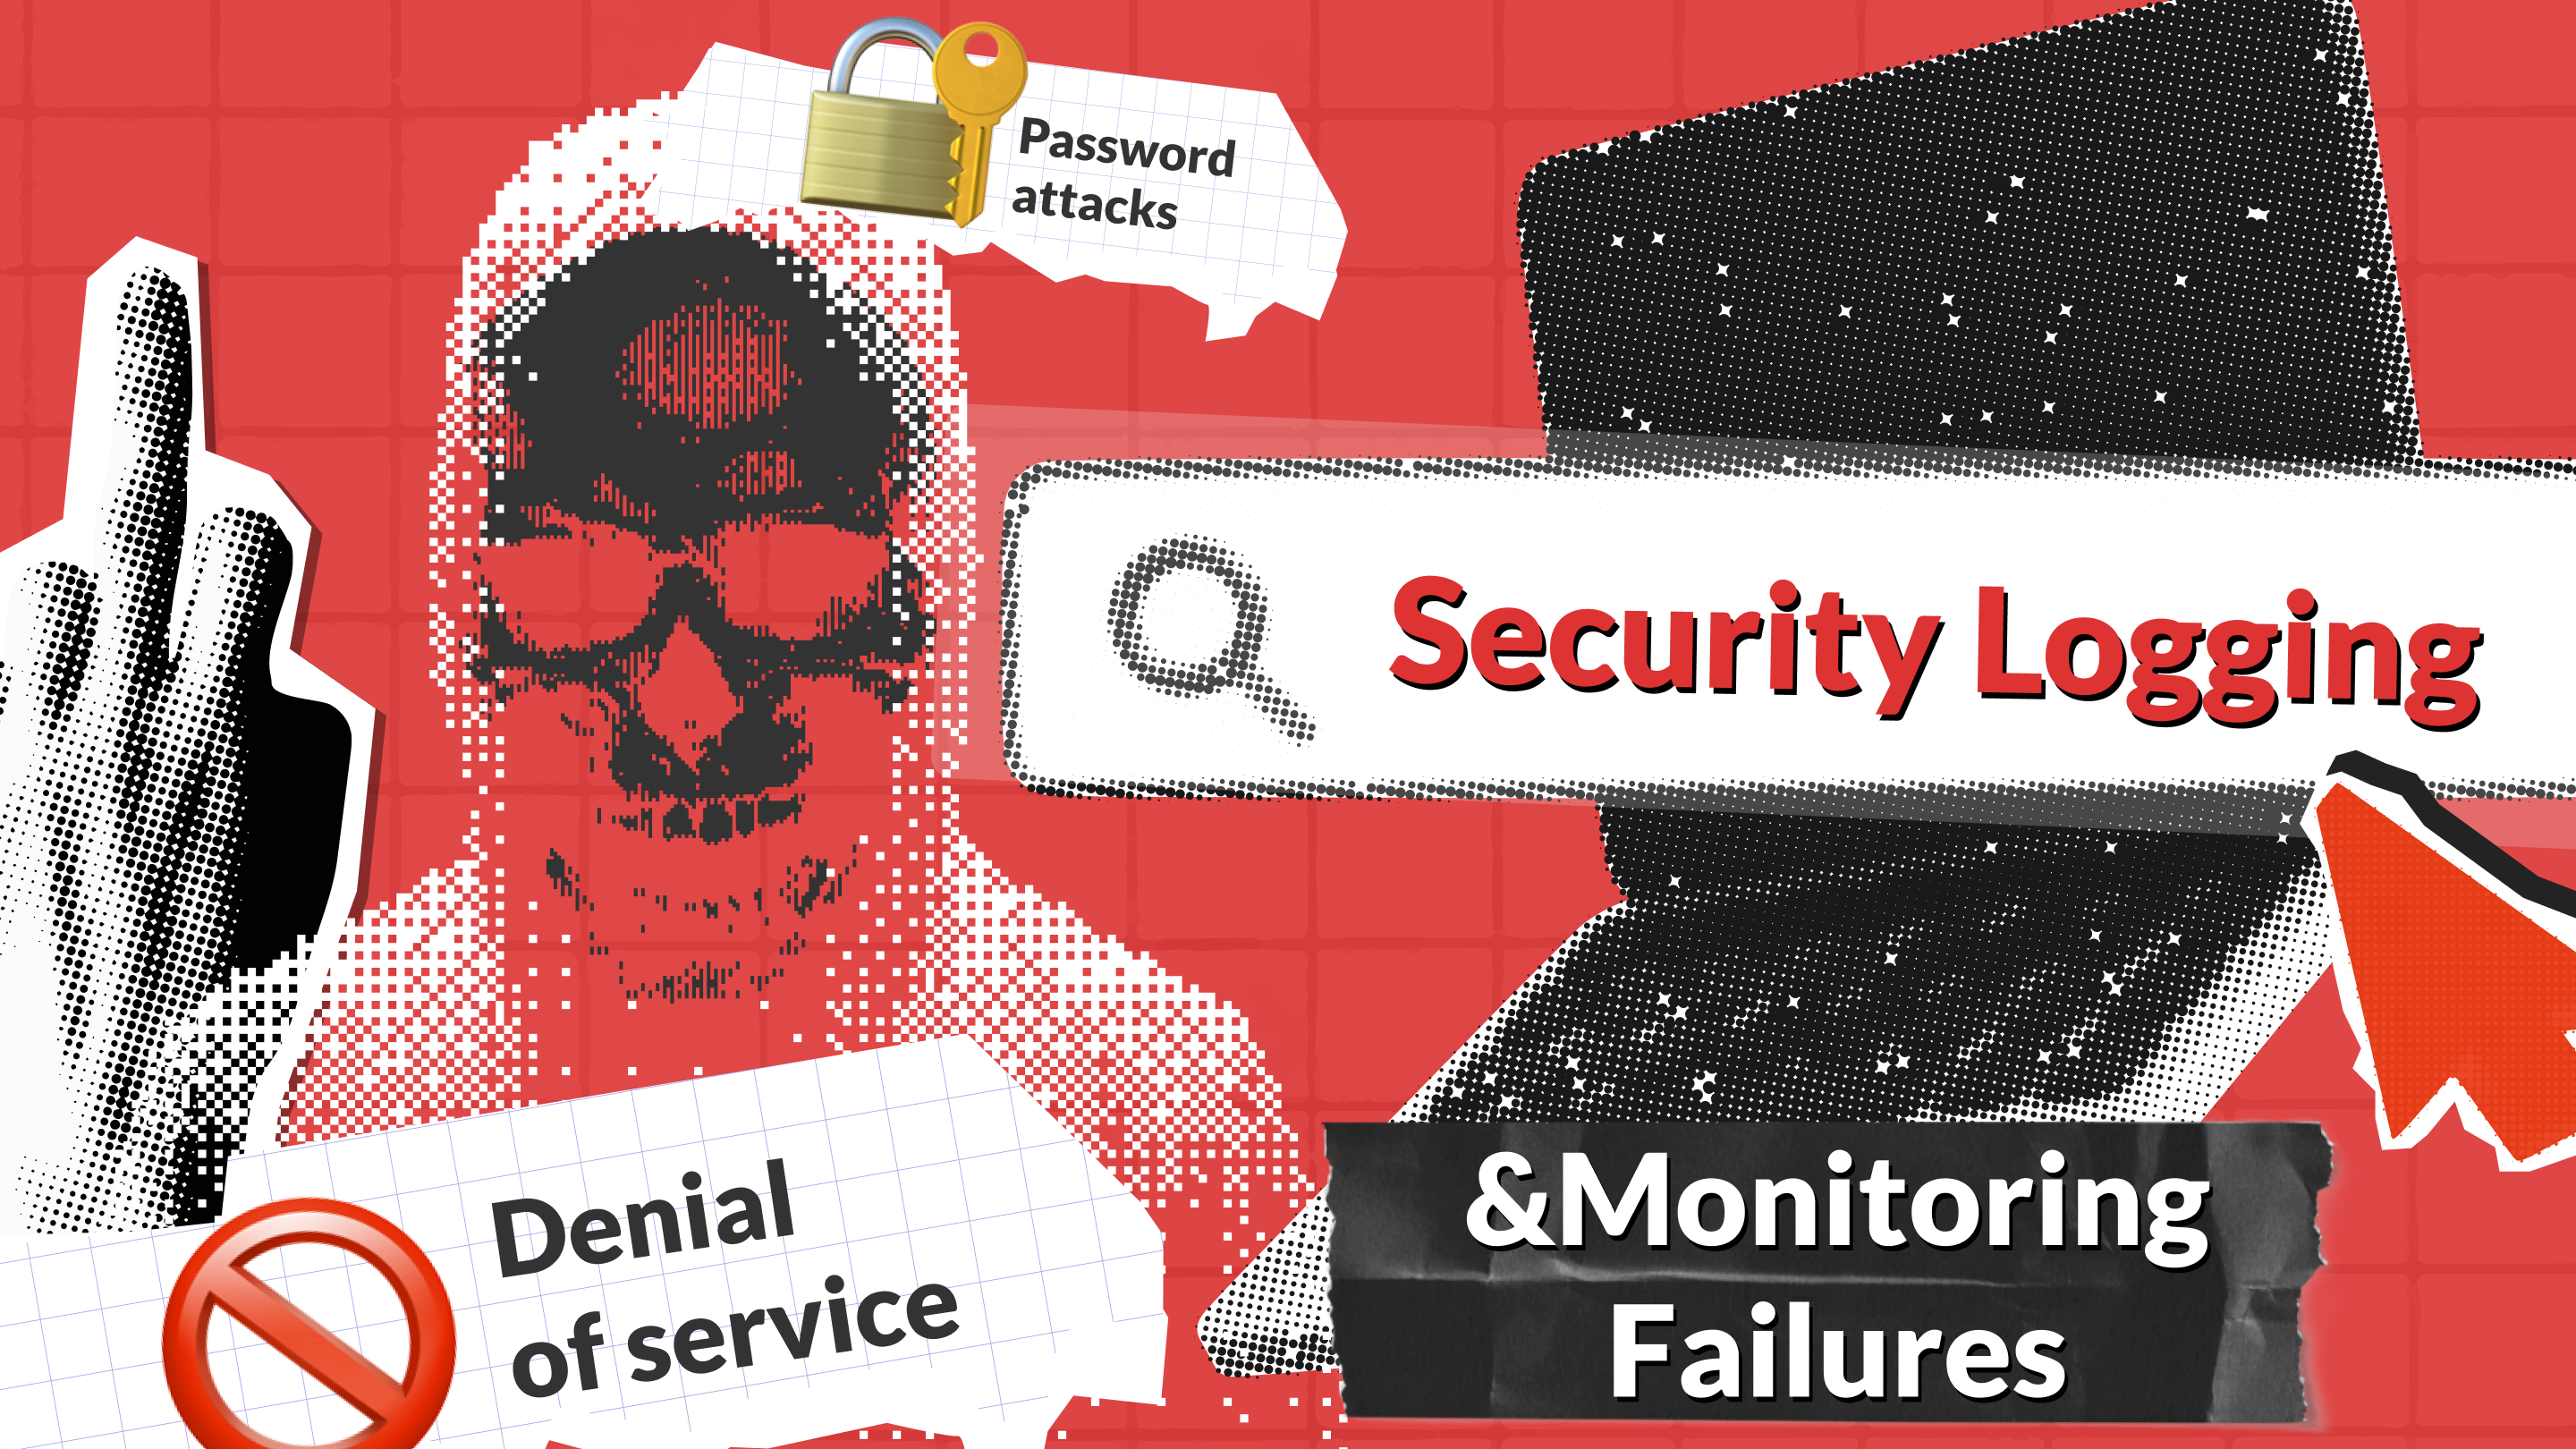 Security Logging and Monitoring Failures: Explanation and Examples